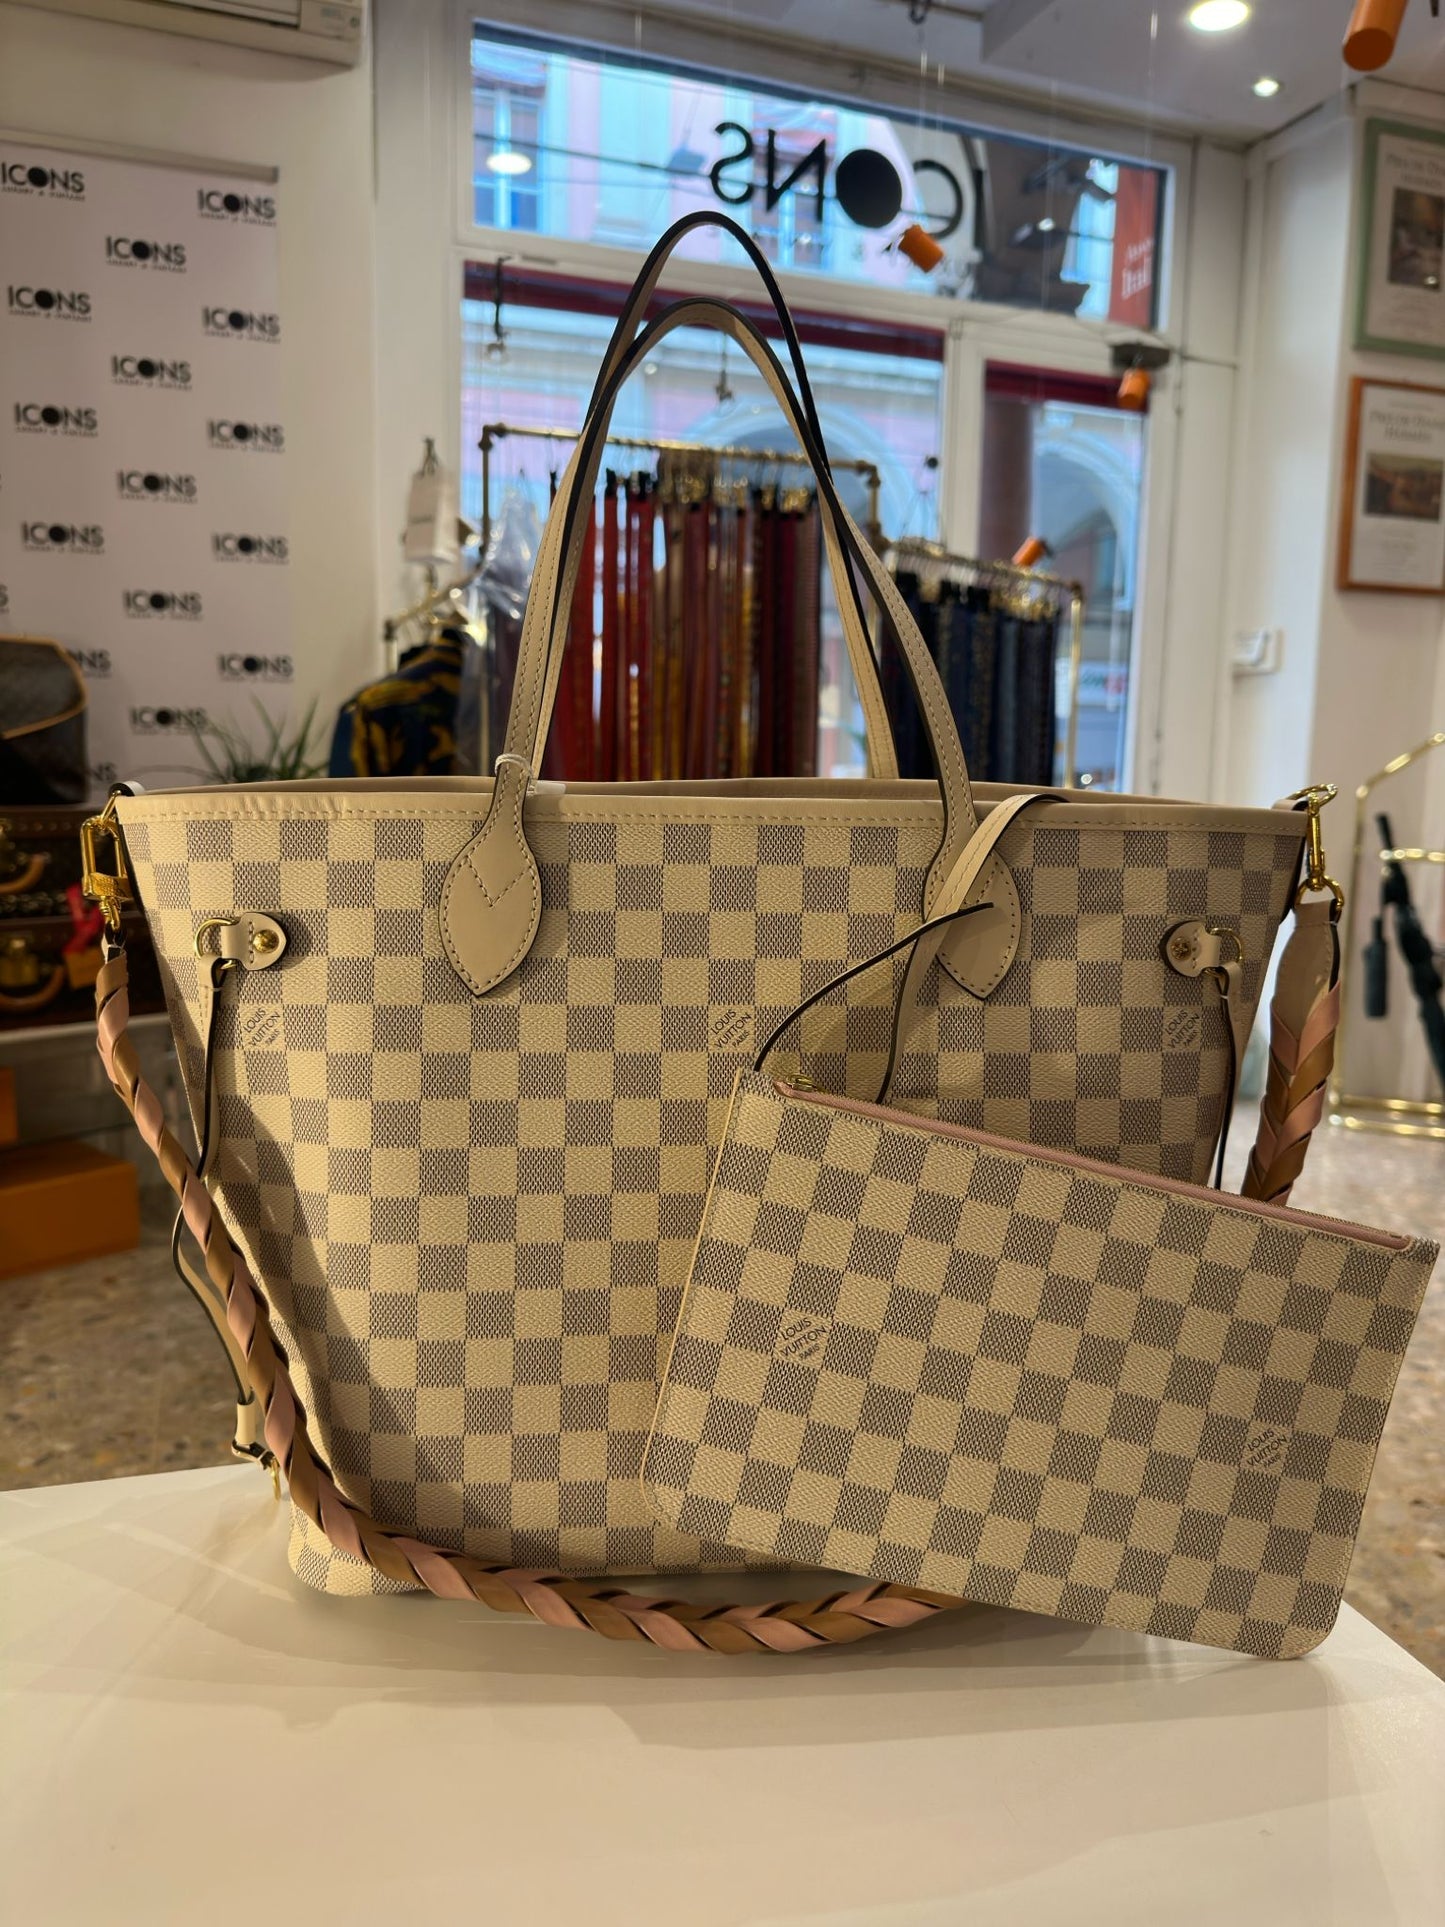 Louis vuitton Neverfull limited edition